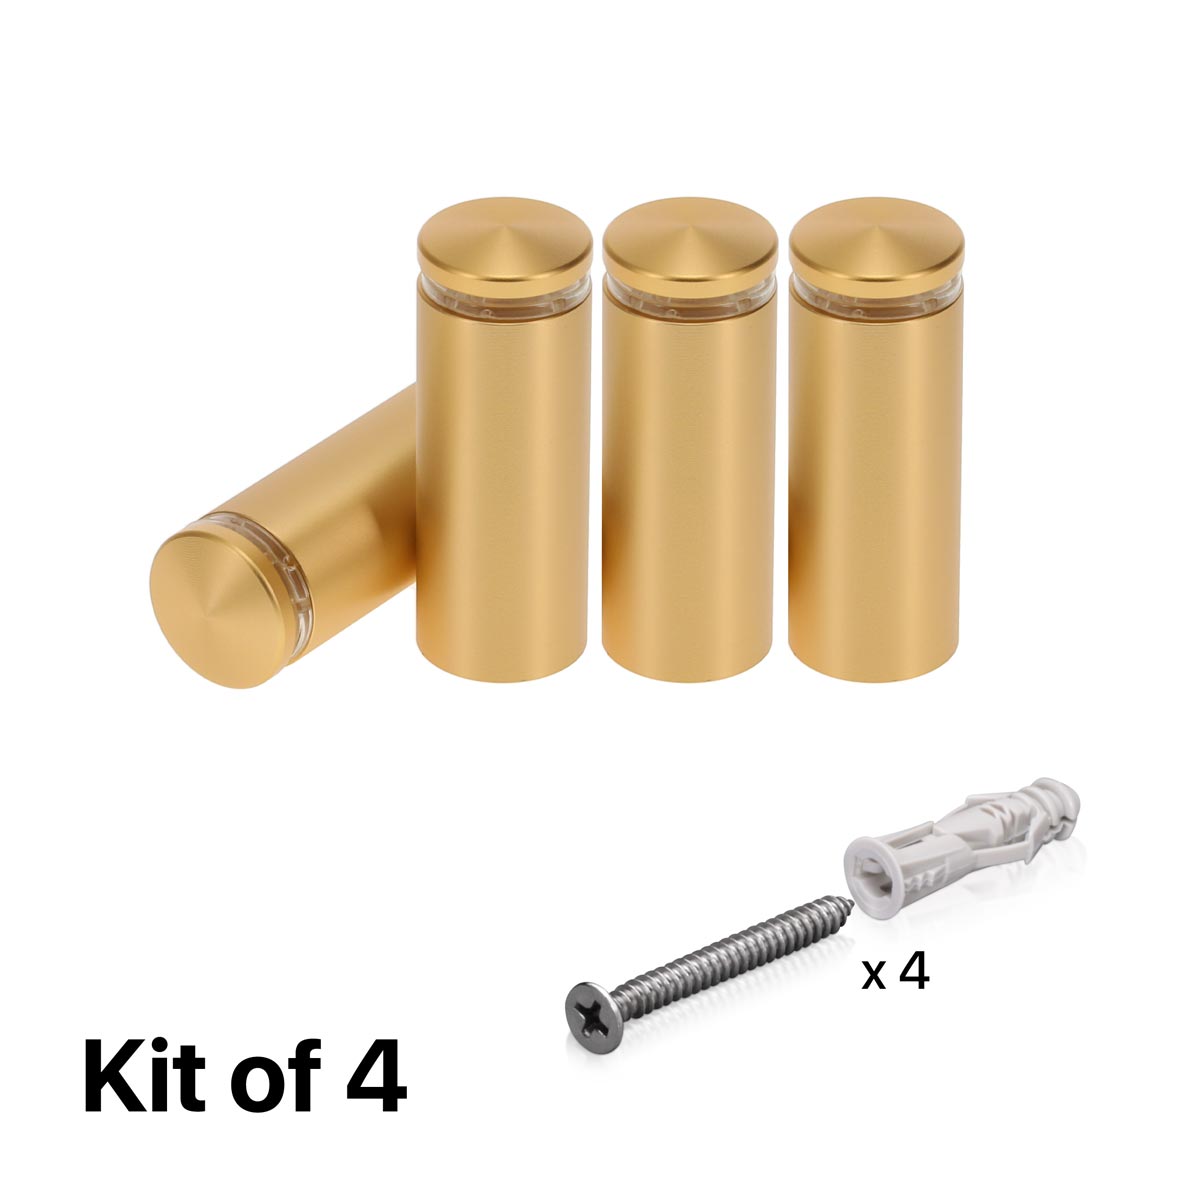 (Set of 4) 3/4'' Diameter X 1-3/4'' Barrel Length, Alumi. Rounded Head Standoffs, Matte Champagne Anodized Finish Standoff with (4) 2216Z Screws and (4) LANC1 Anchors for concrete or drywall (For In / Out use) [Required Material Hole Size: 7/16'']